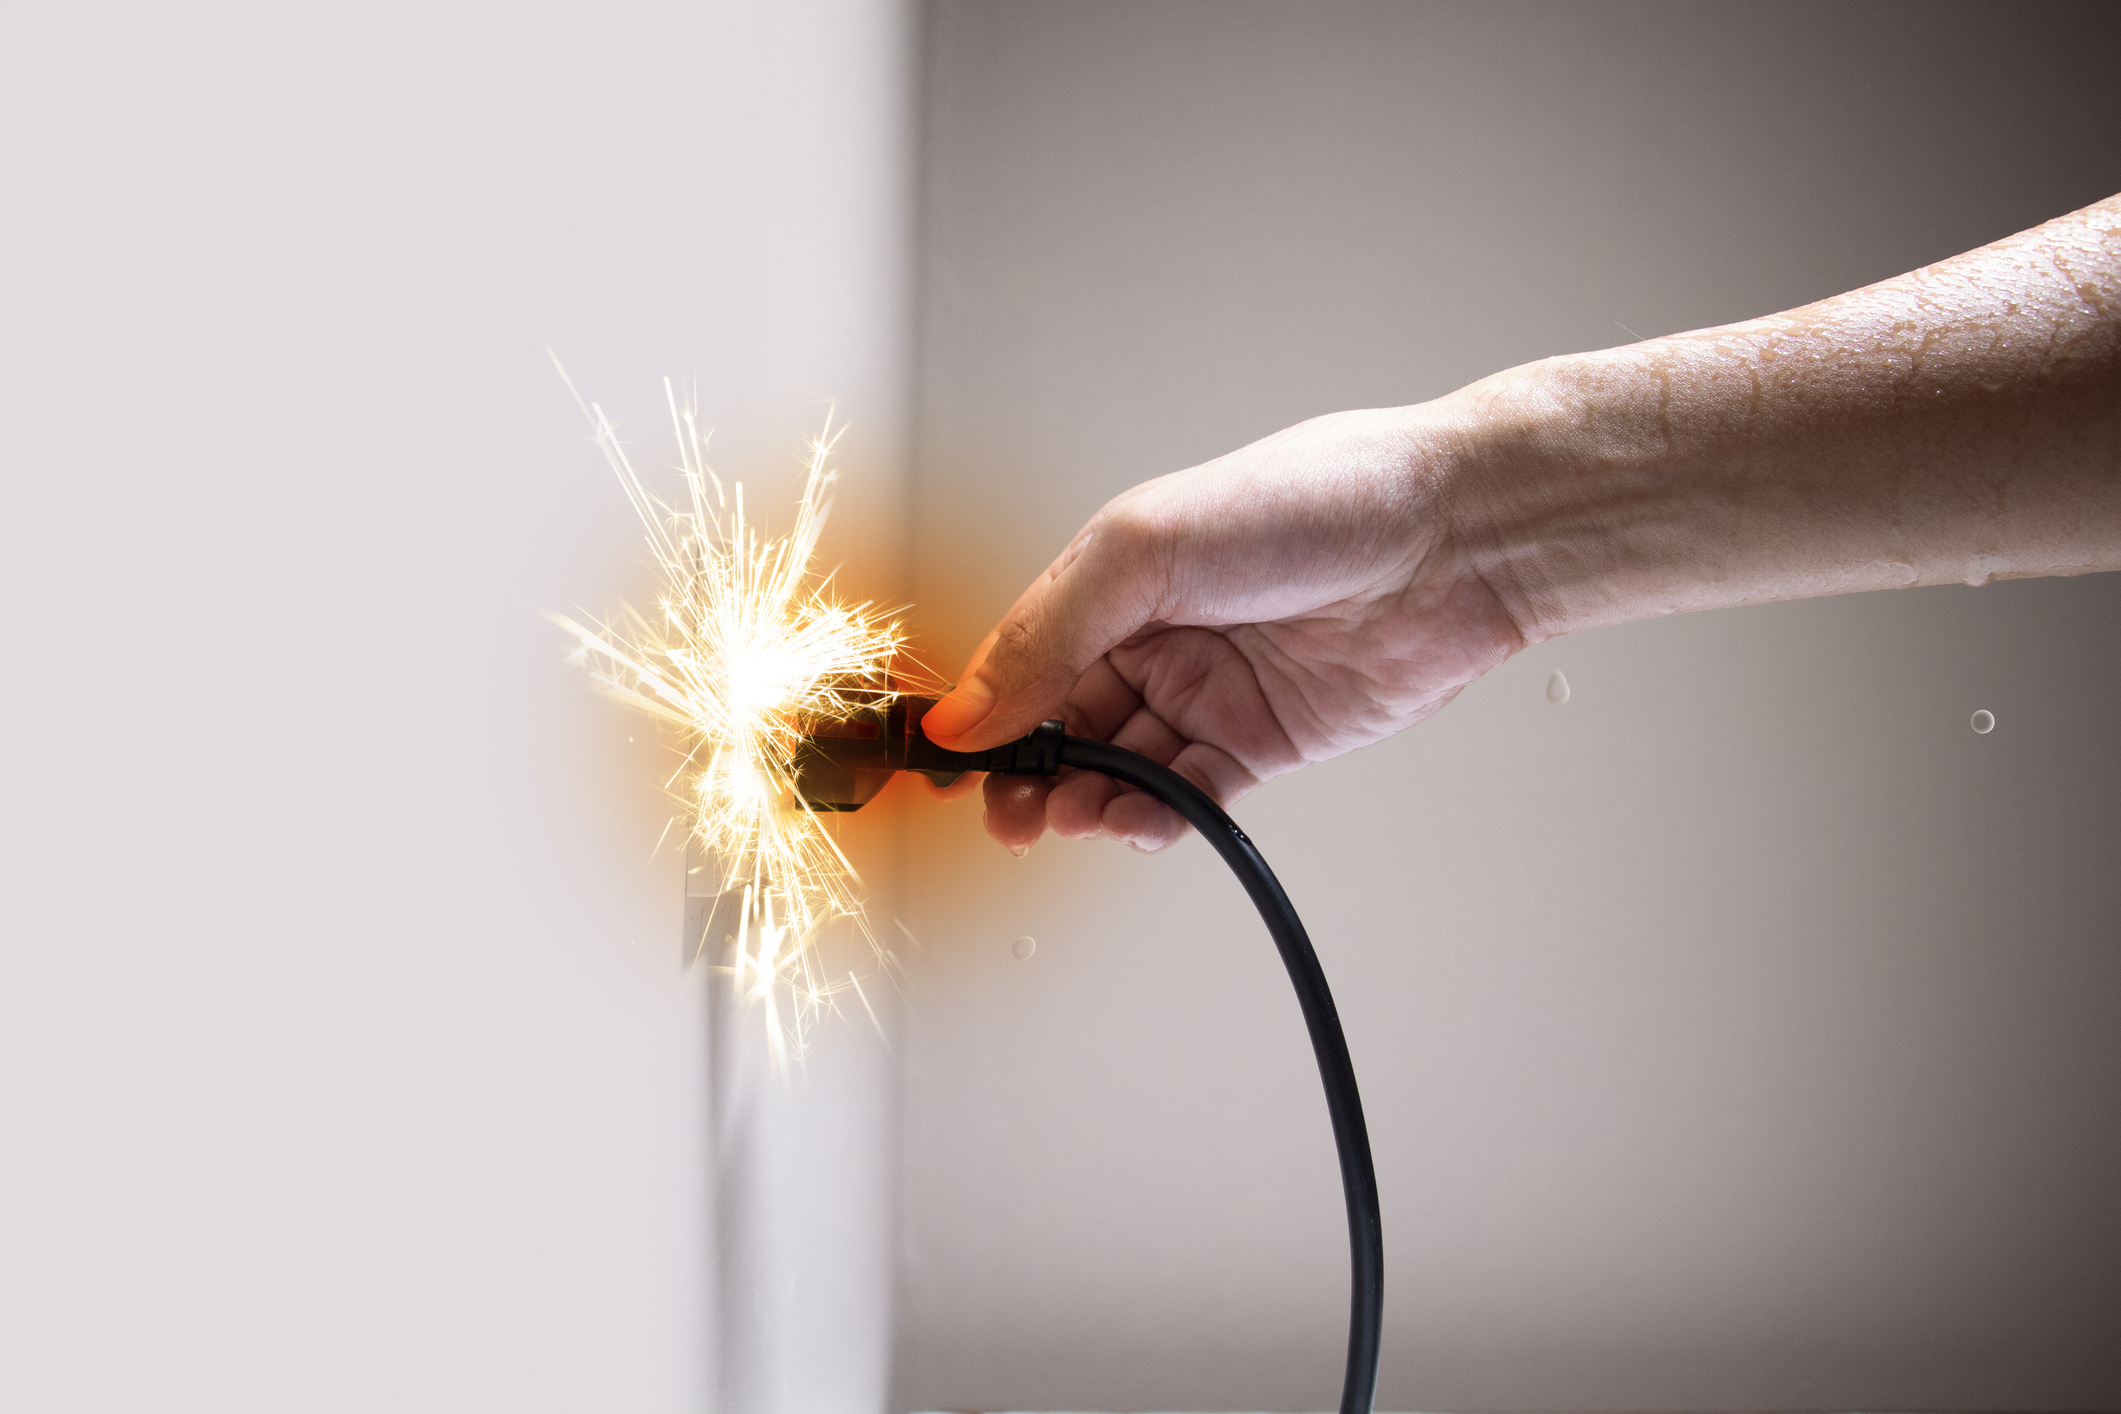 Sparks while plugging cord into socket